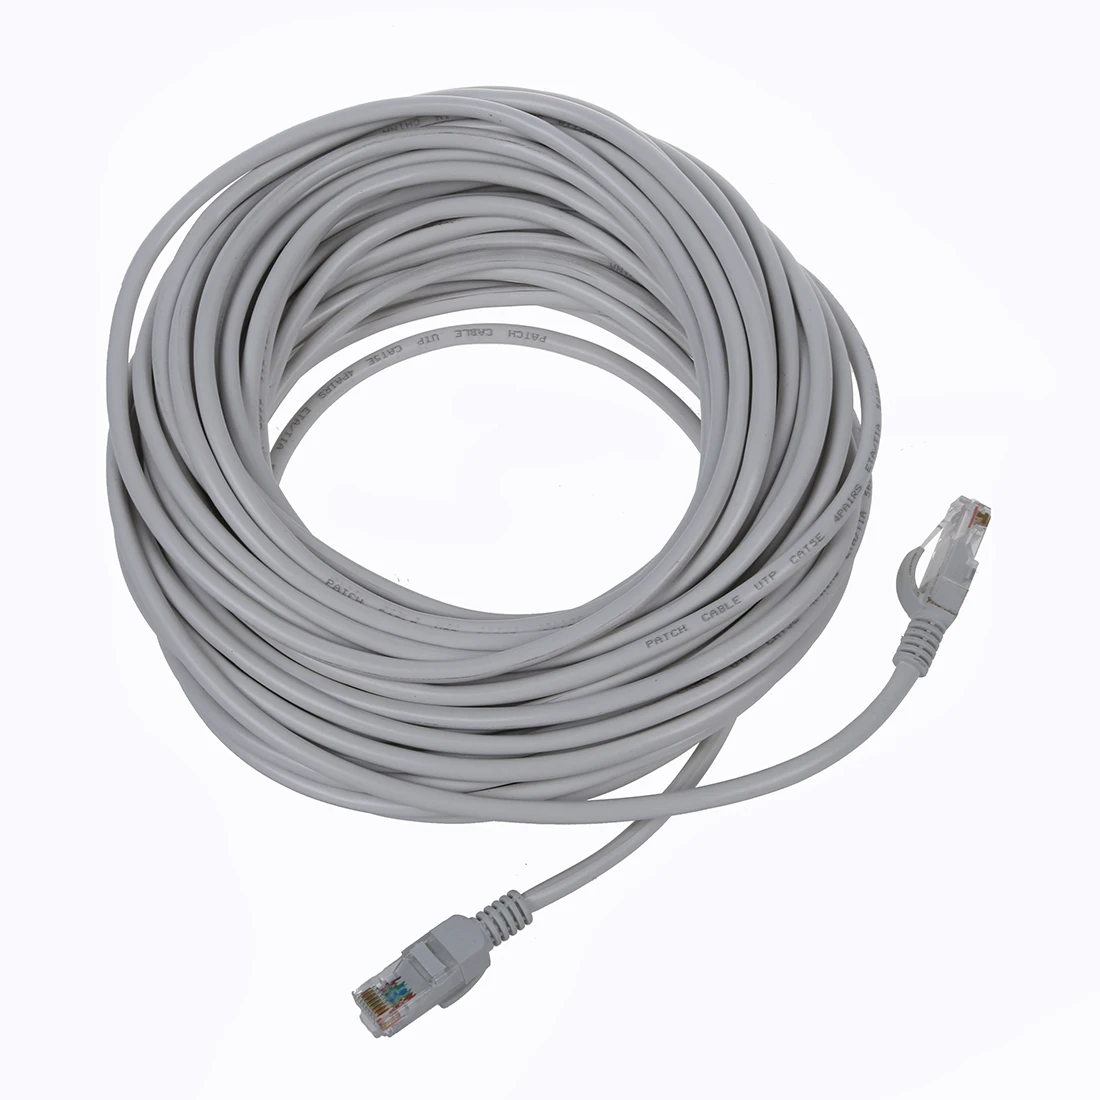 50 ft CAT 5e LAN Network Cable 350MHz RJ 45 connector WHITEin